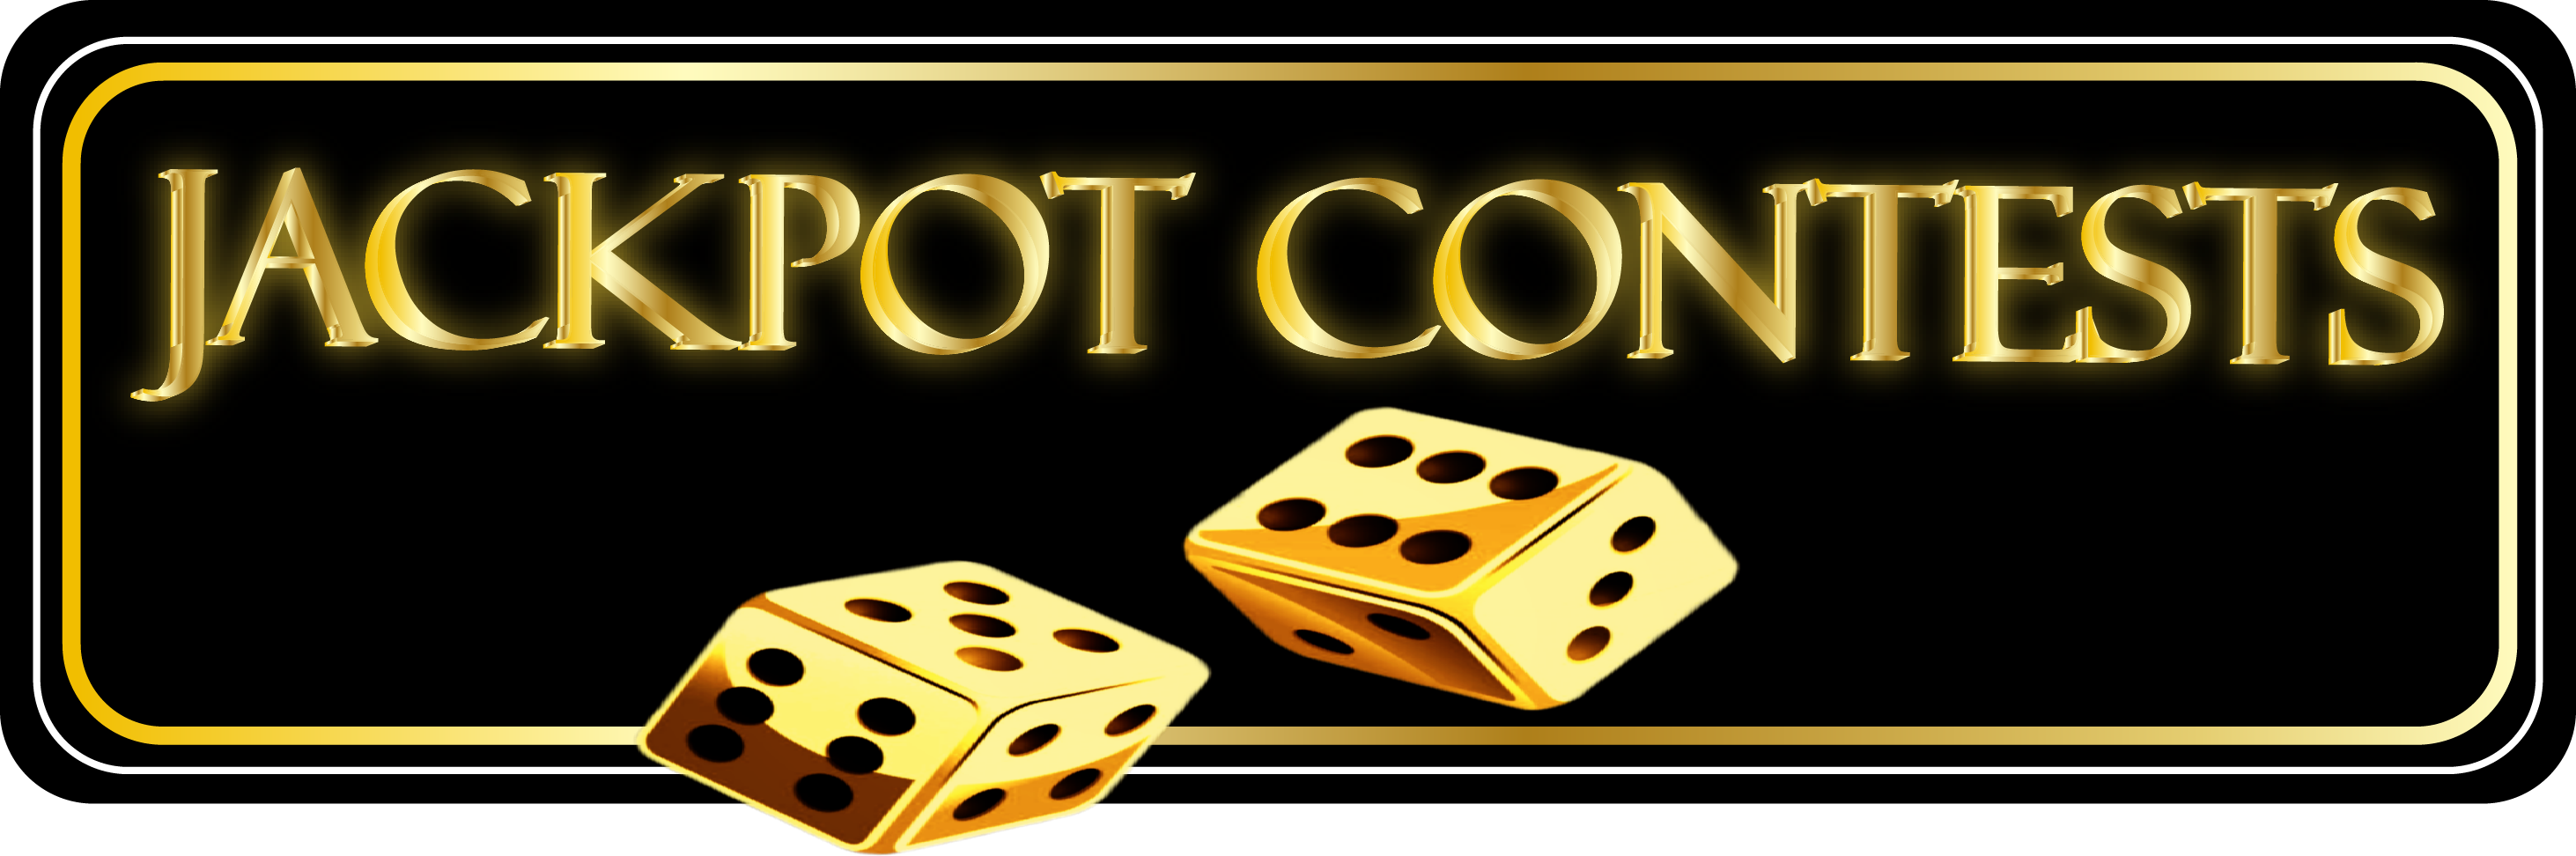 Jackpot contest banner.png